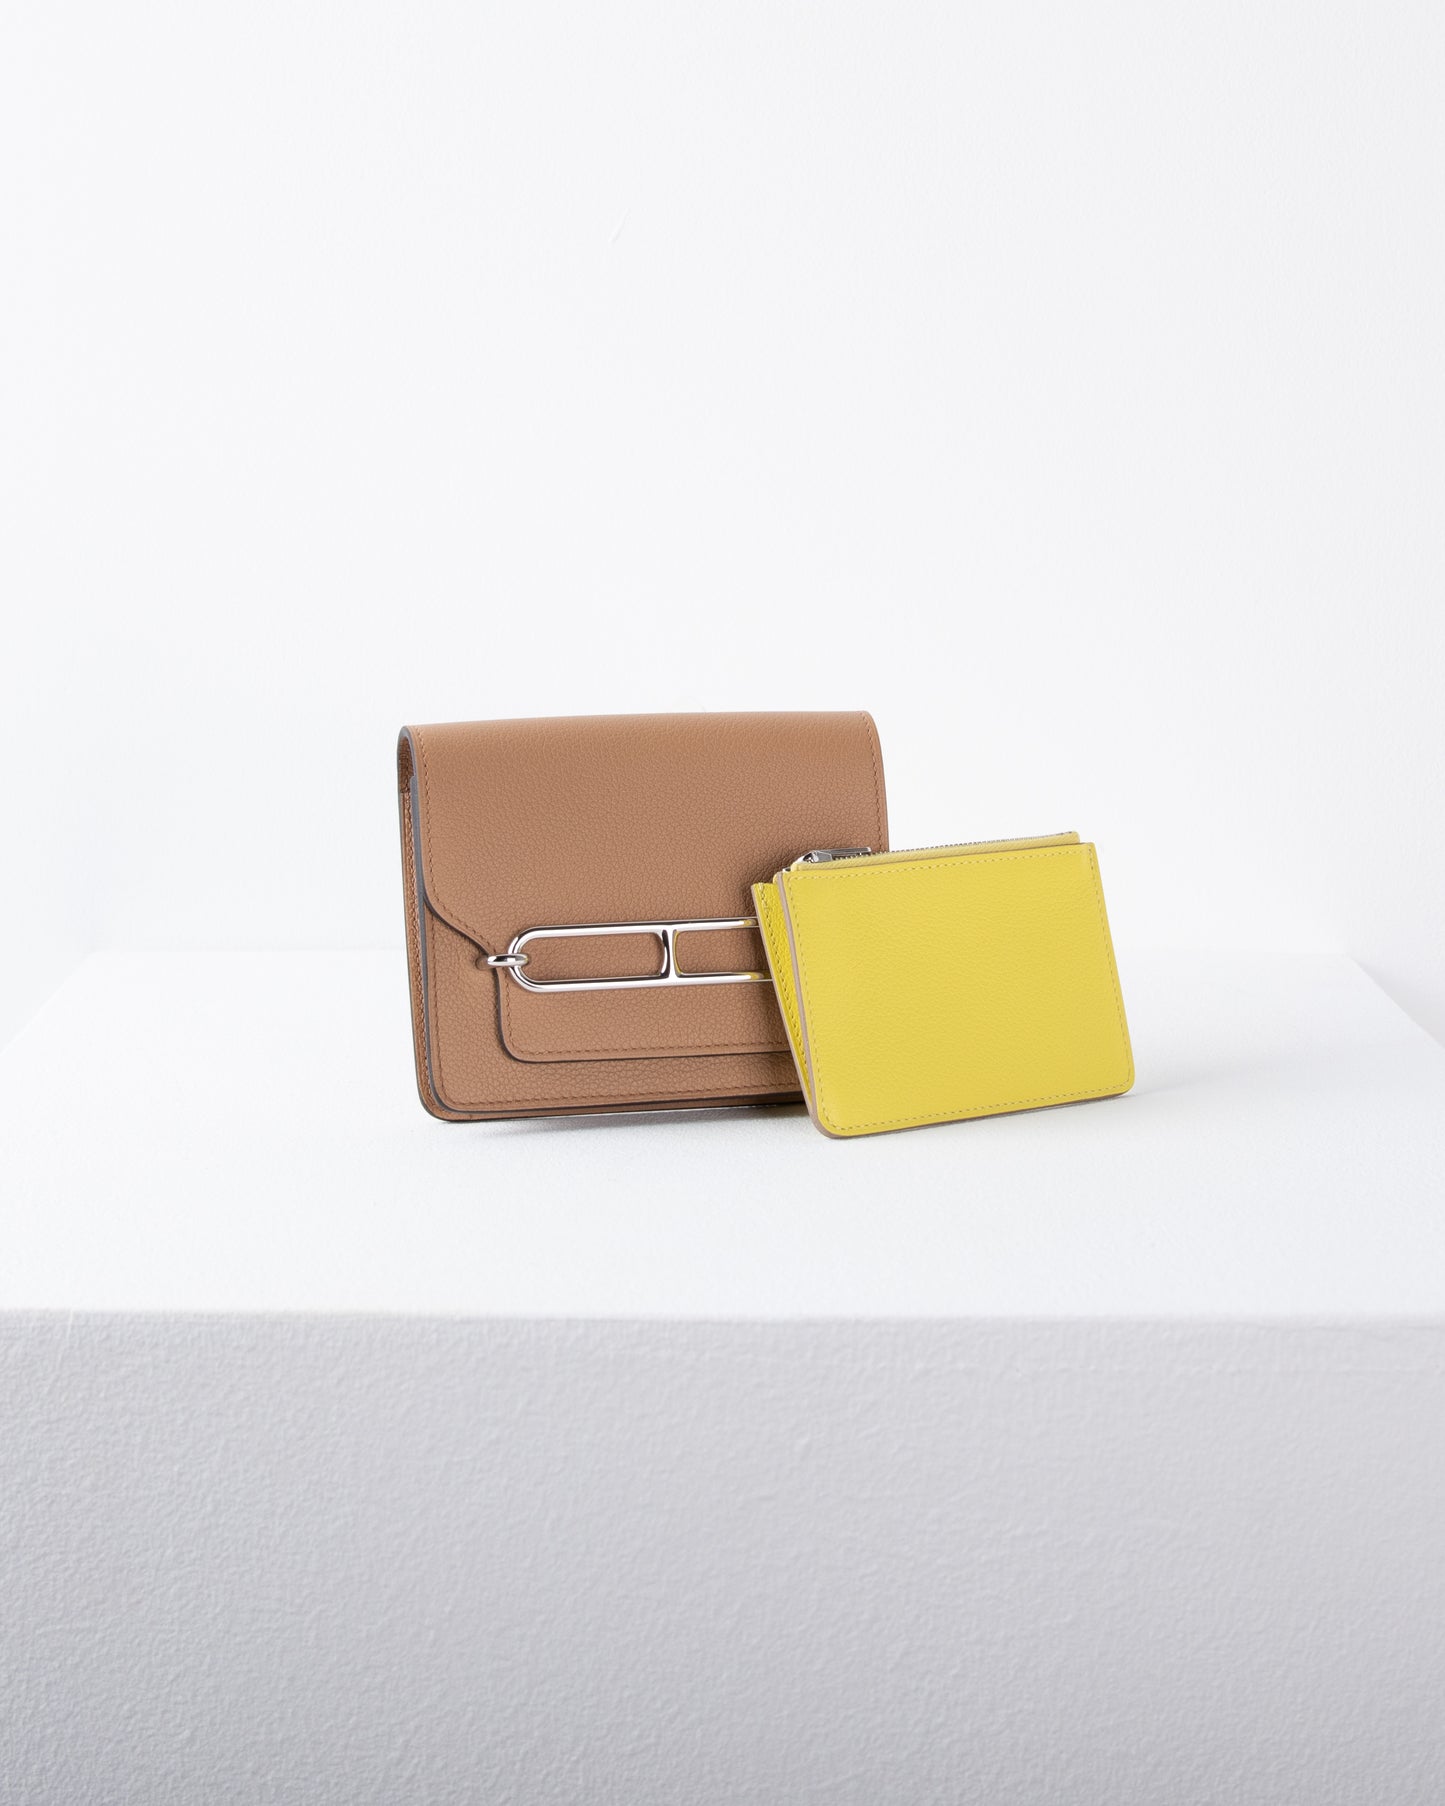 Roulis Slim Compact Wallet in Chai/Lime Evercolor Leather with Palladium Hardware